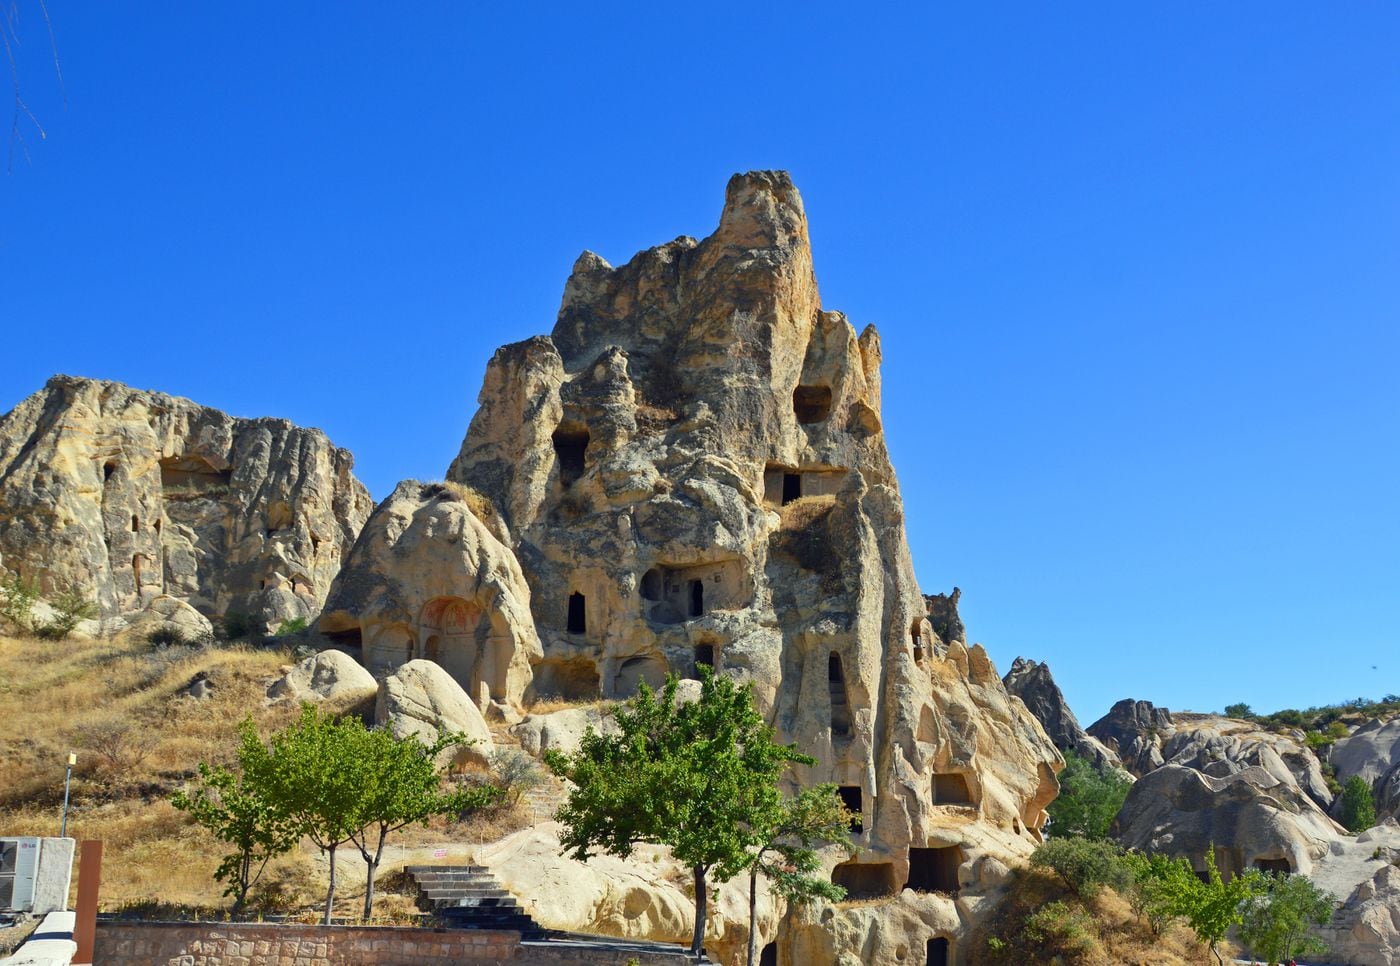 Goreme Open-Air Museum is a vast Byzantine monastic settlement created over the 10th to 12th centuries.